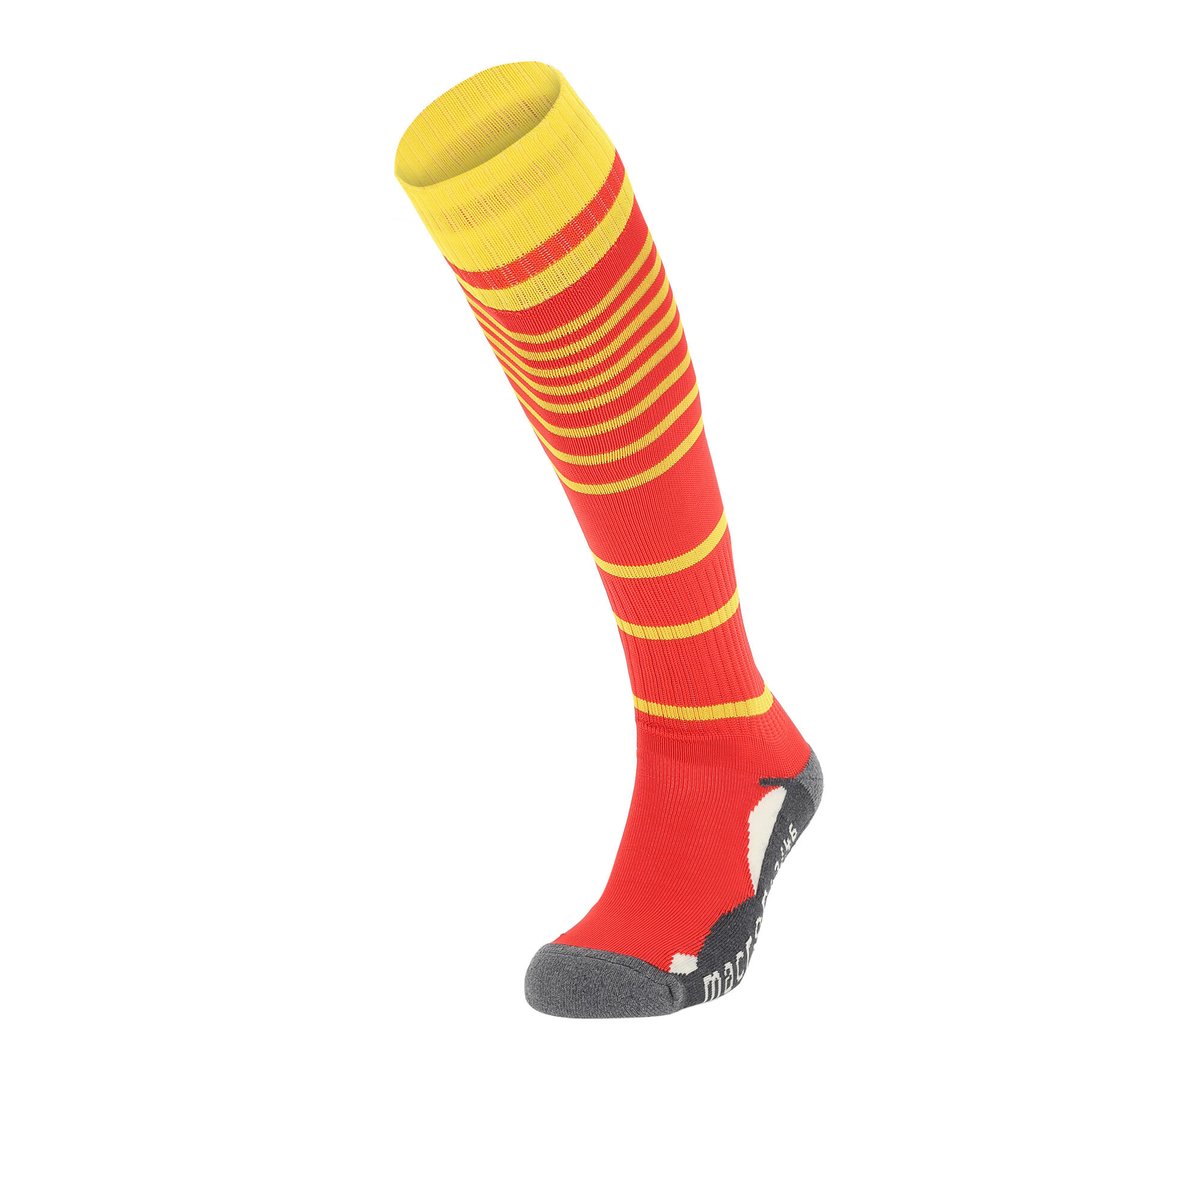 Macron Target Match Sock - Red/Yellow (Pack of 5)